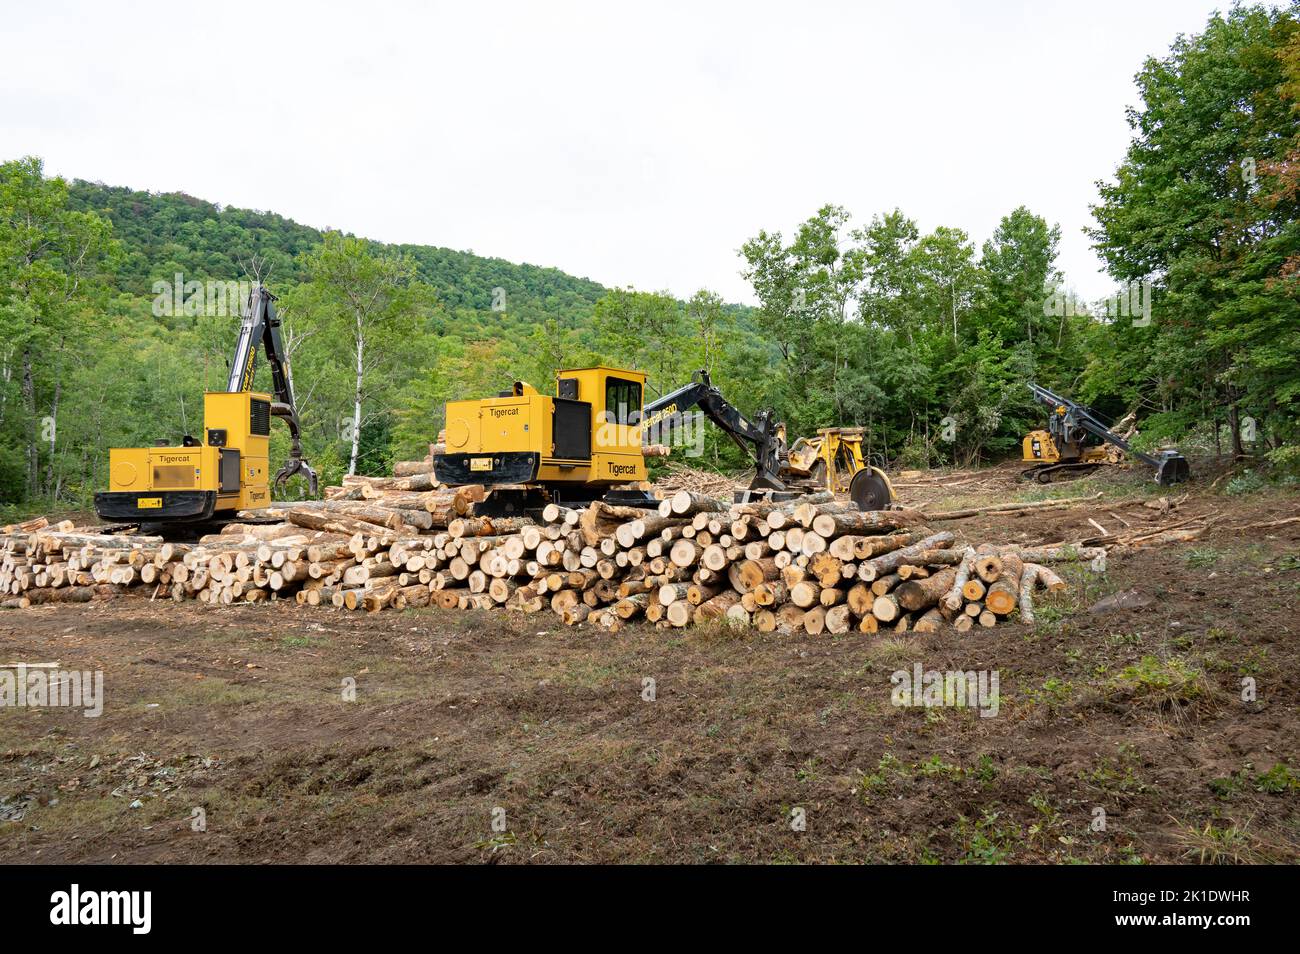 A logging job site in the Adirondack Mountains, NY with two loaders a log saw and a tree delimber and a pile of cut logs ready for transport. Stock Photo